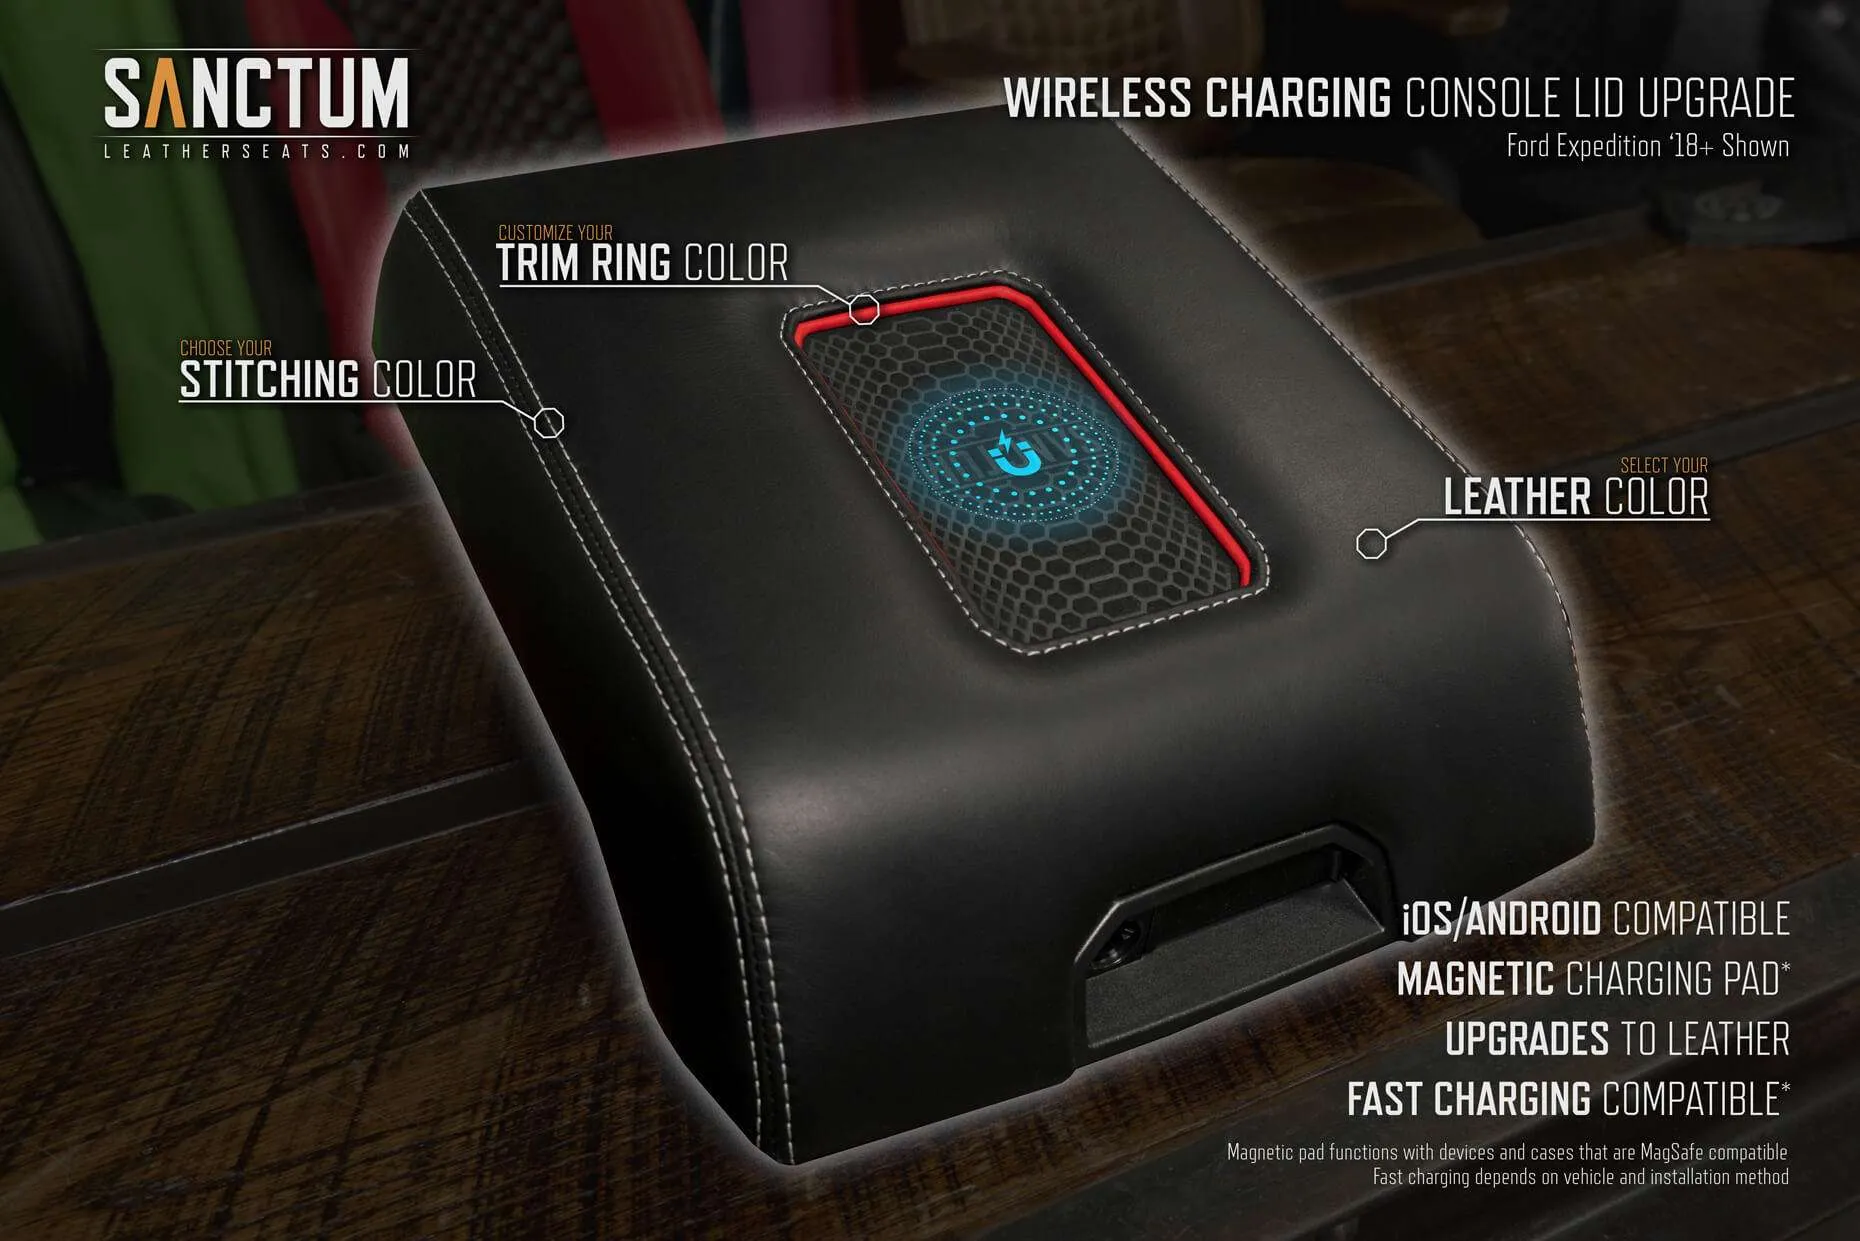 Ford Expedition '18+ Sanctum Wireless Charging Console Features